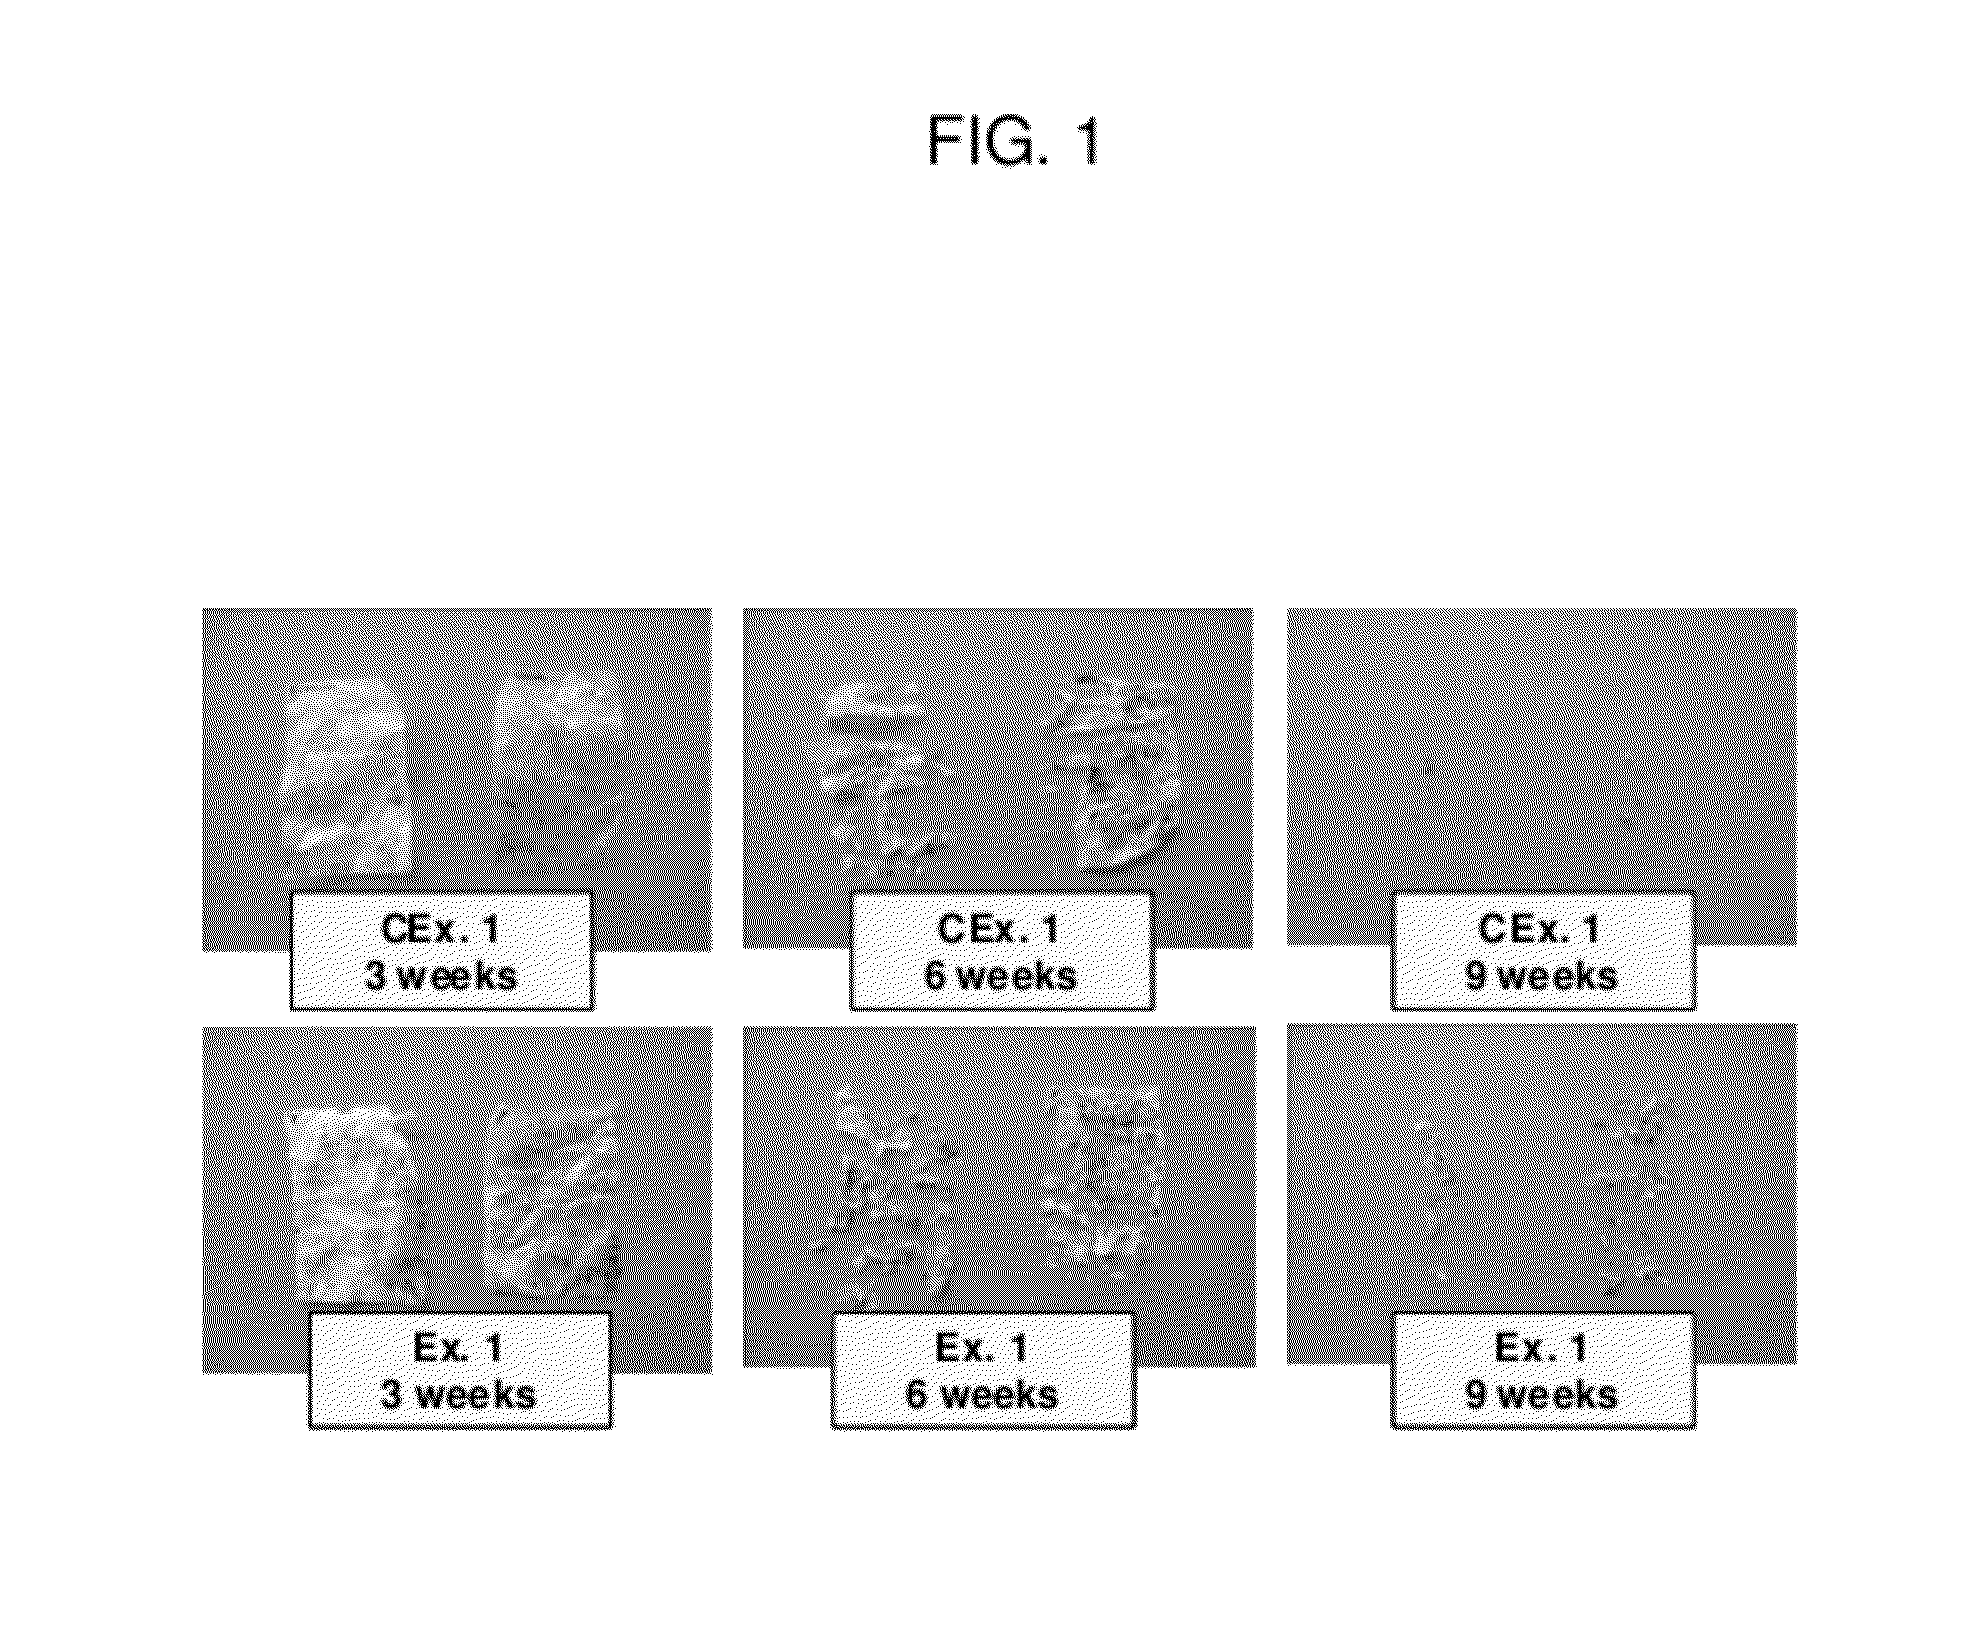 Biaxially oriented cavitated polylactic acid film